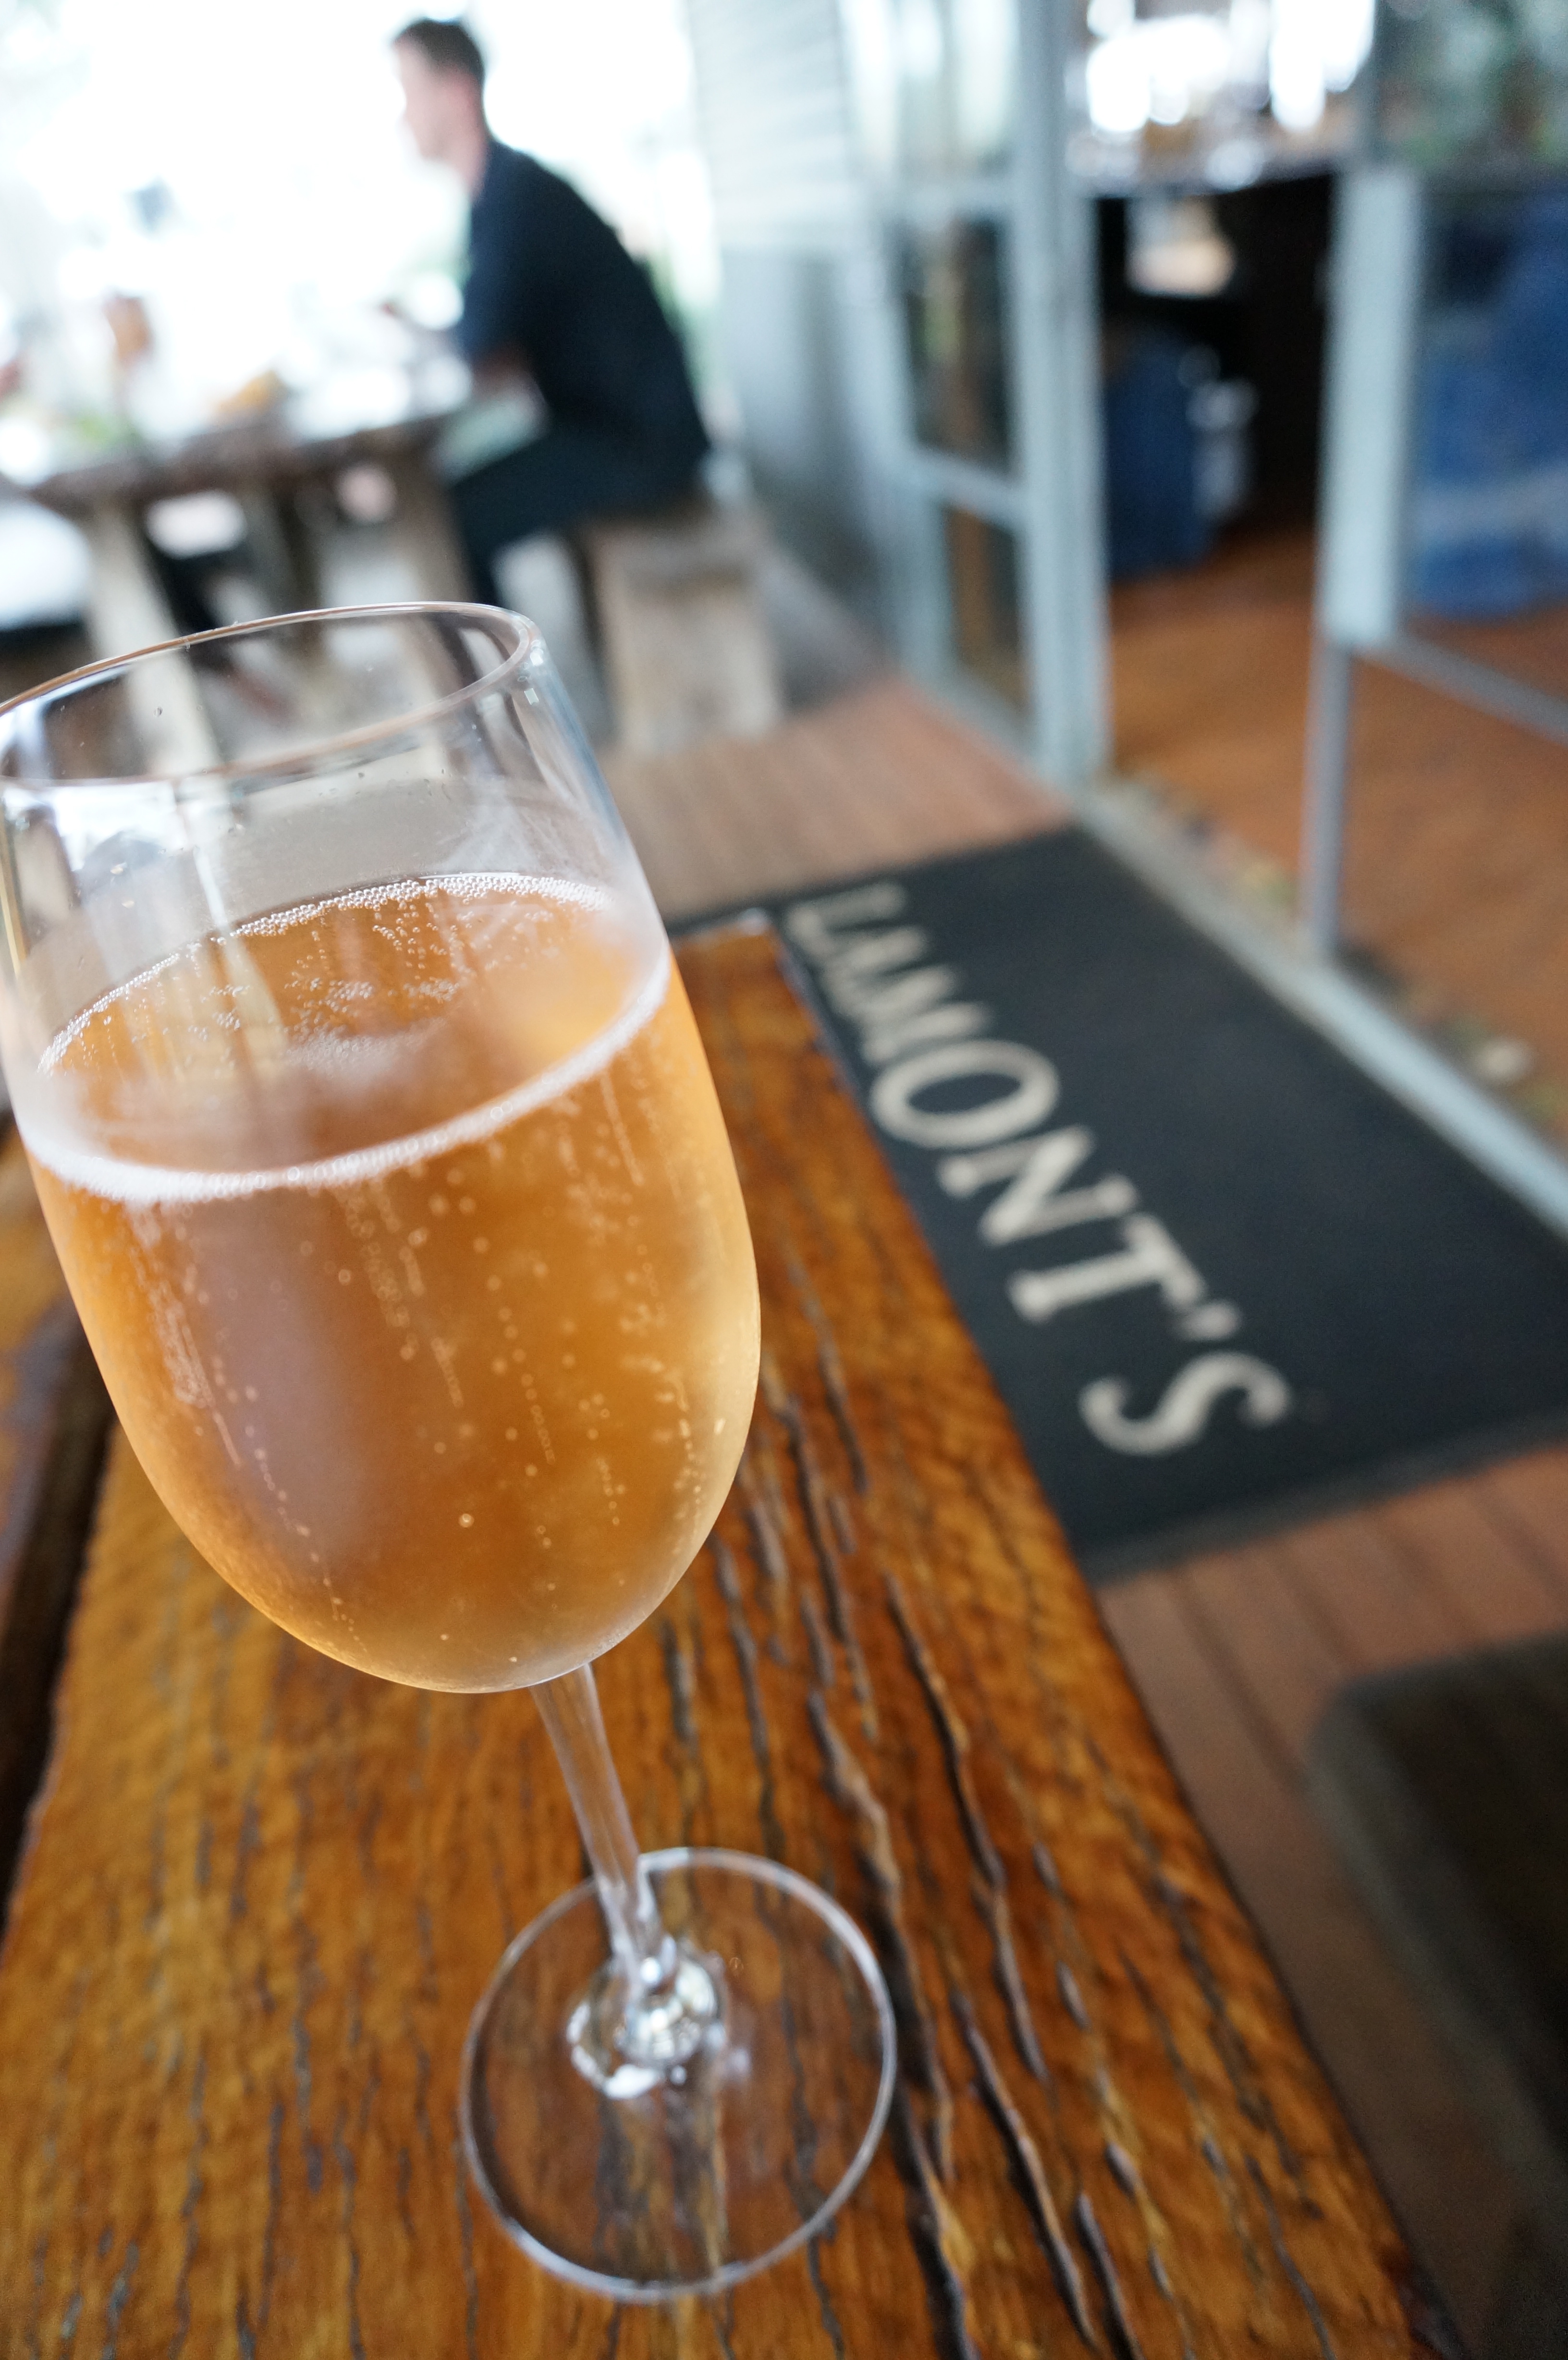 Sparkling wine at Lamont's in the Swan Valley